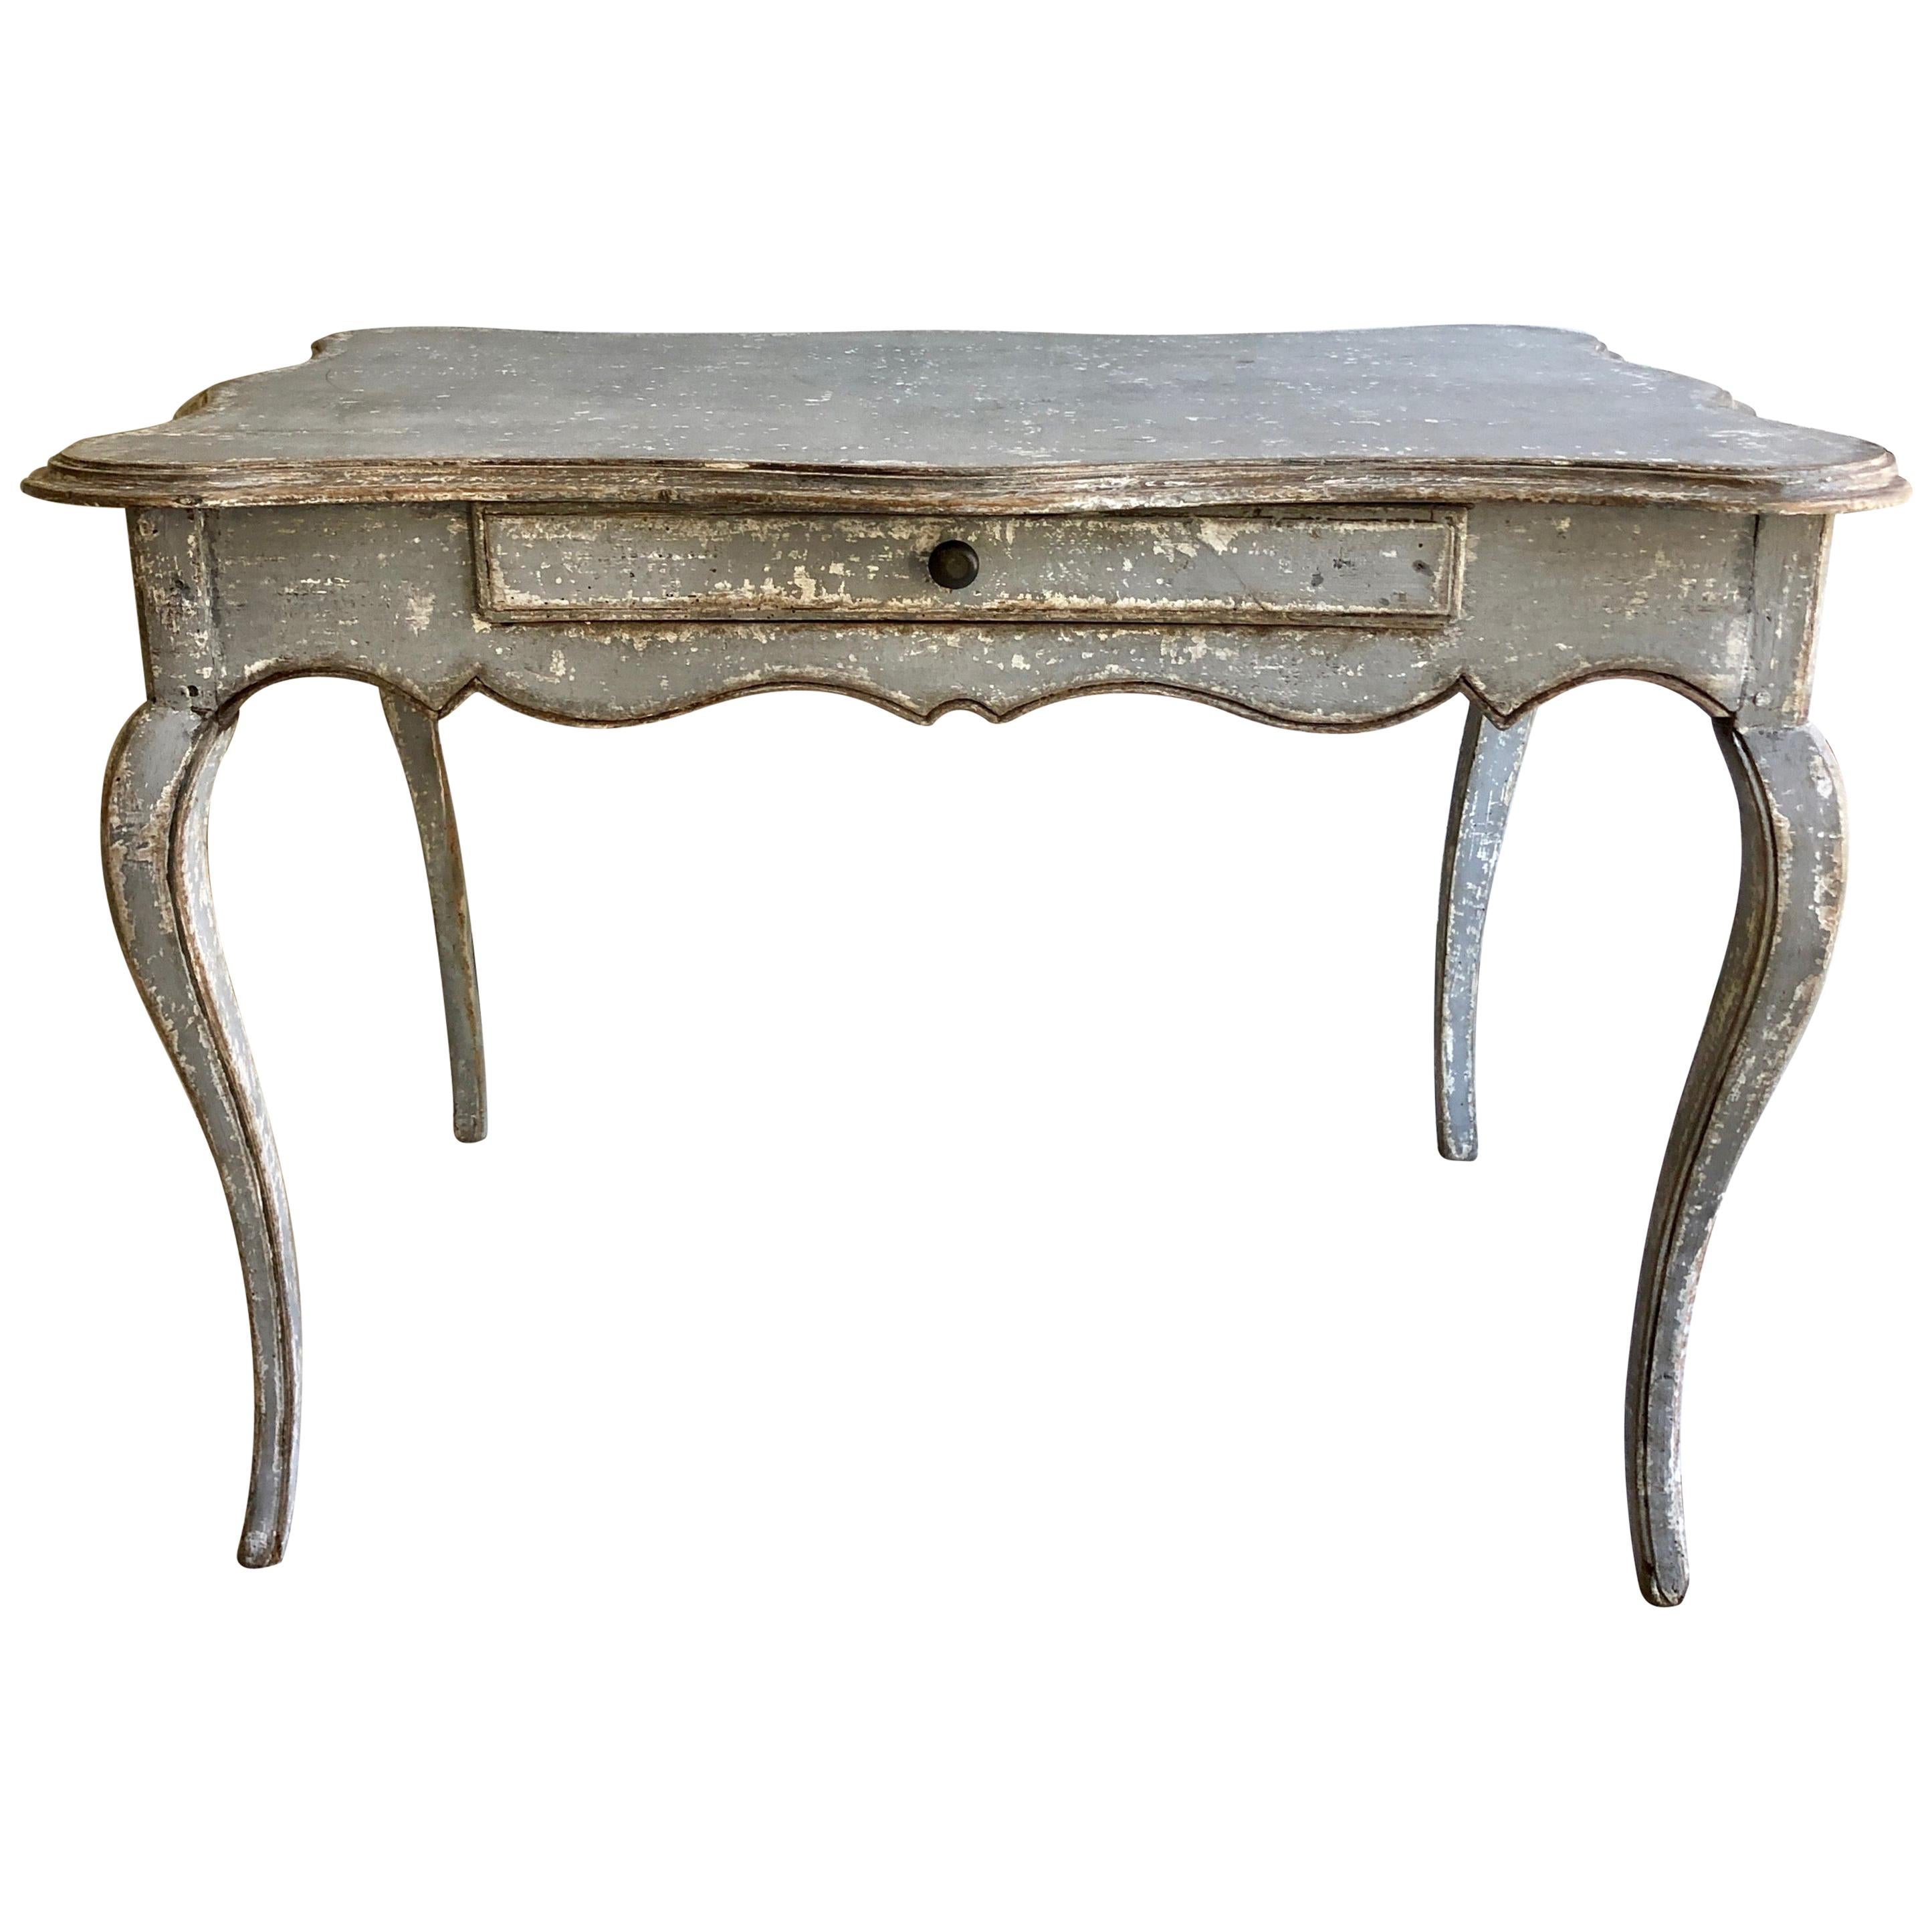 19th Century French Lxv Style Painted Writing Table